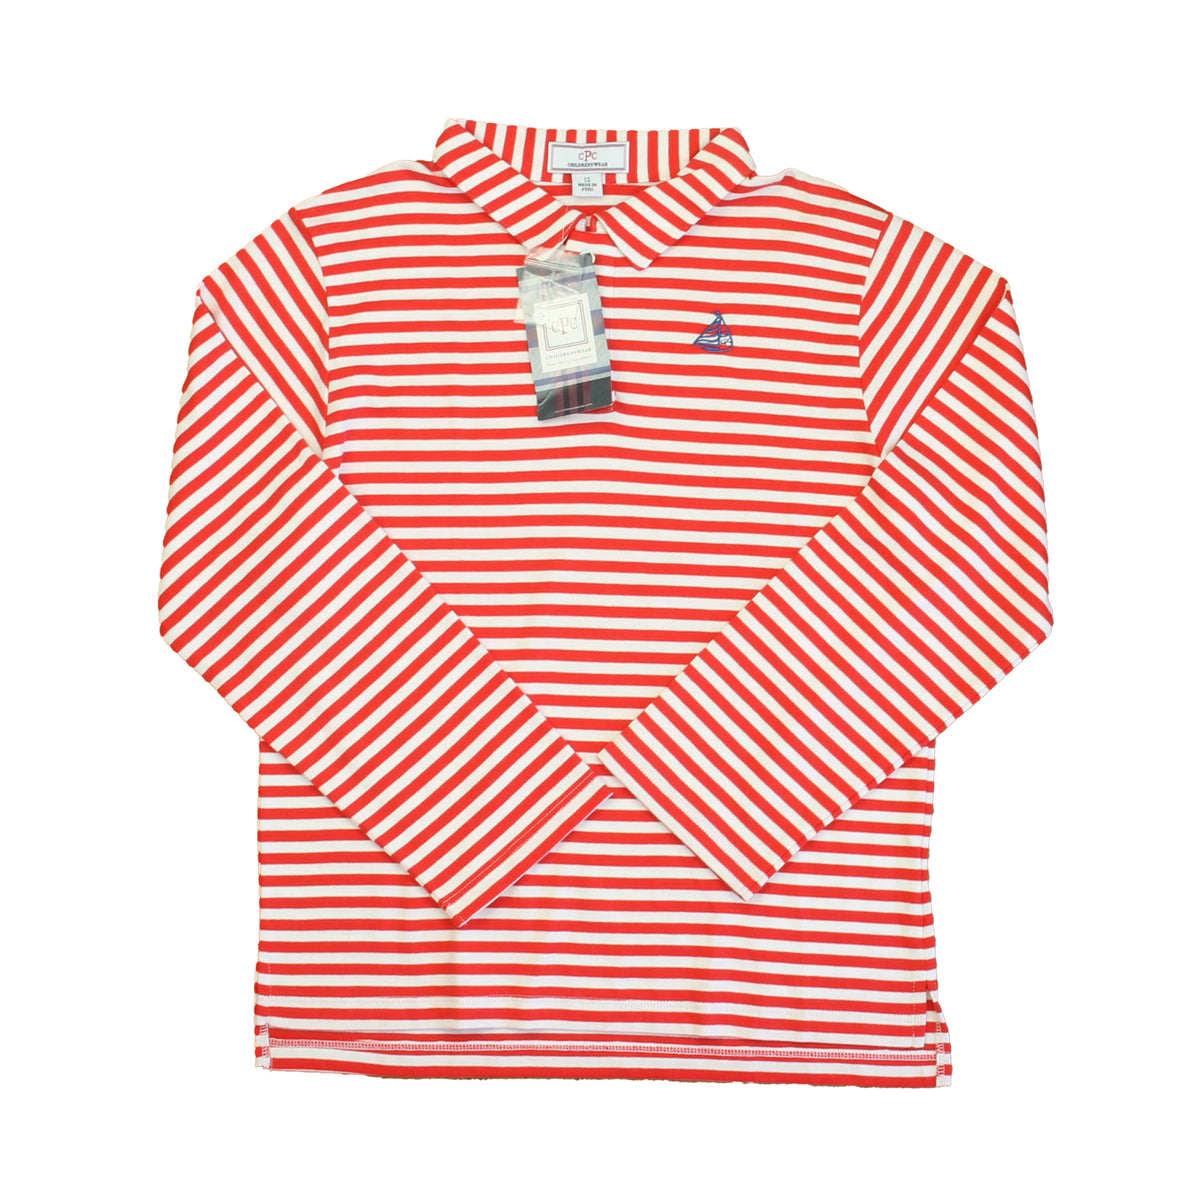 New with Tags: Tomato and White Stripe Top size: 6-14 Years -- FINAL SALE